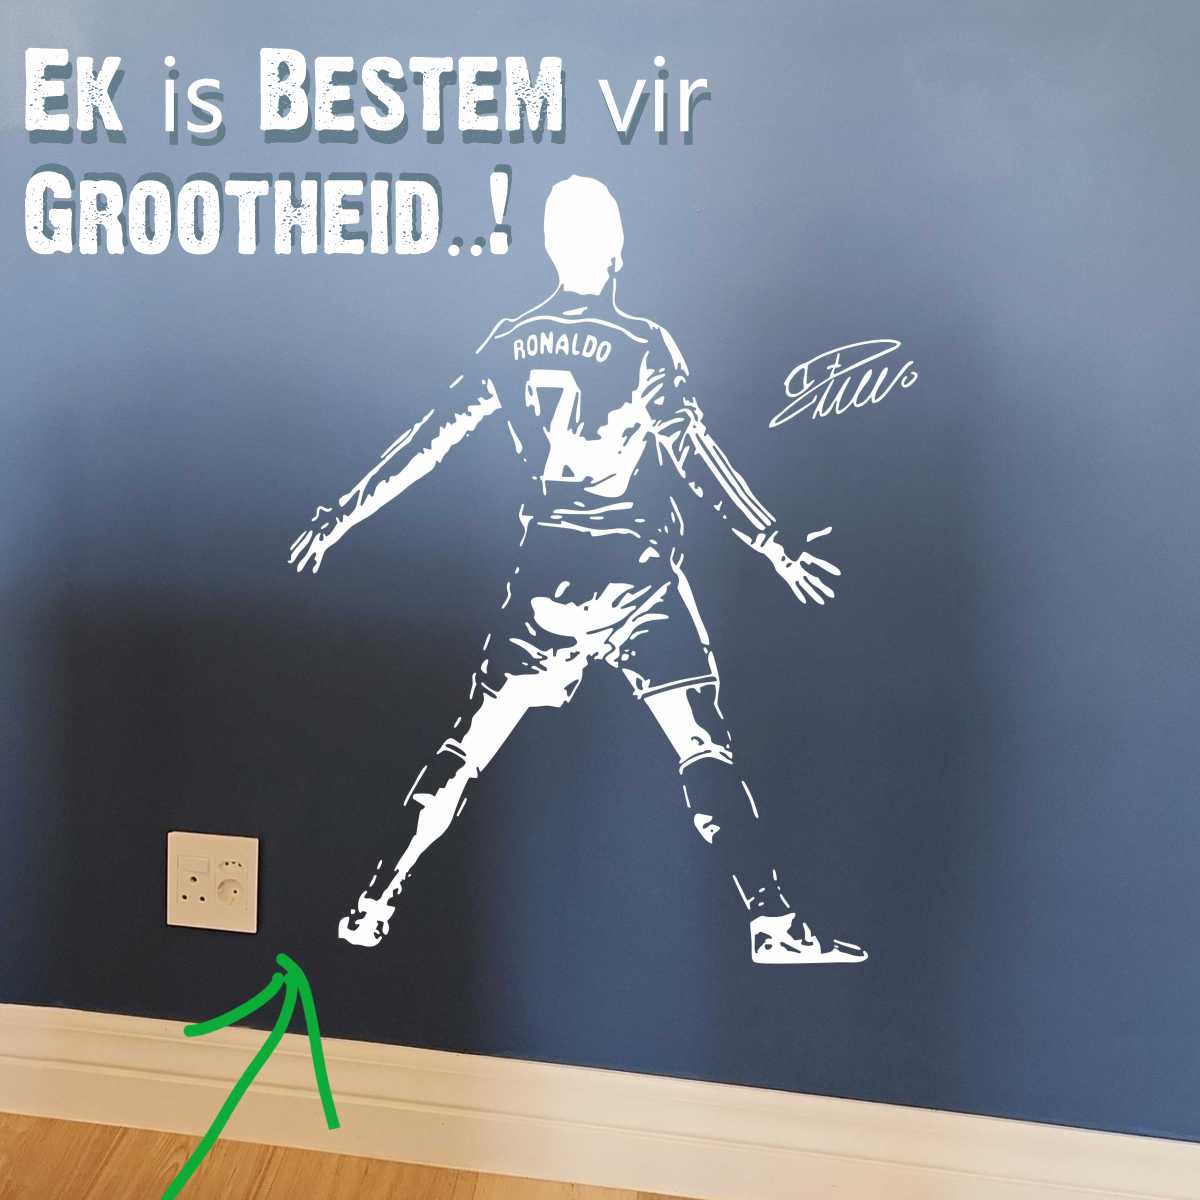 Ronaldo Mockup of Afrikaans word wall art. Displaying "I am destined for greatness"